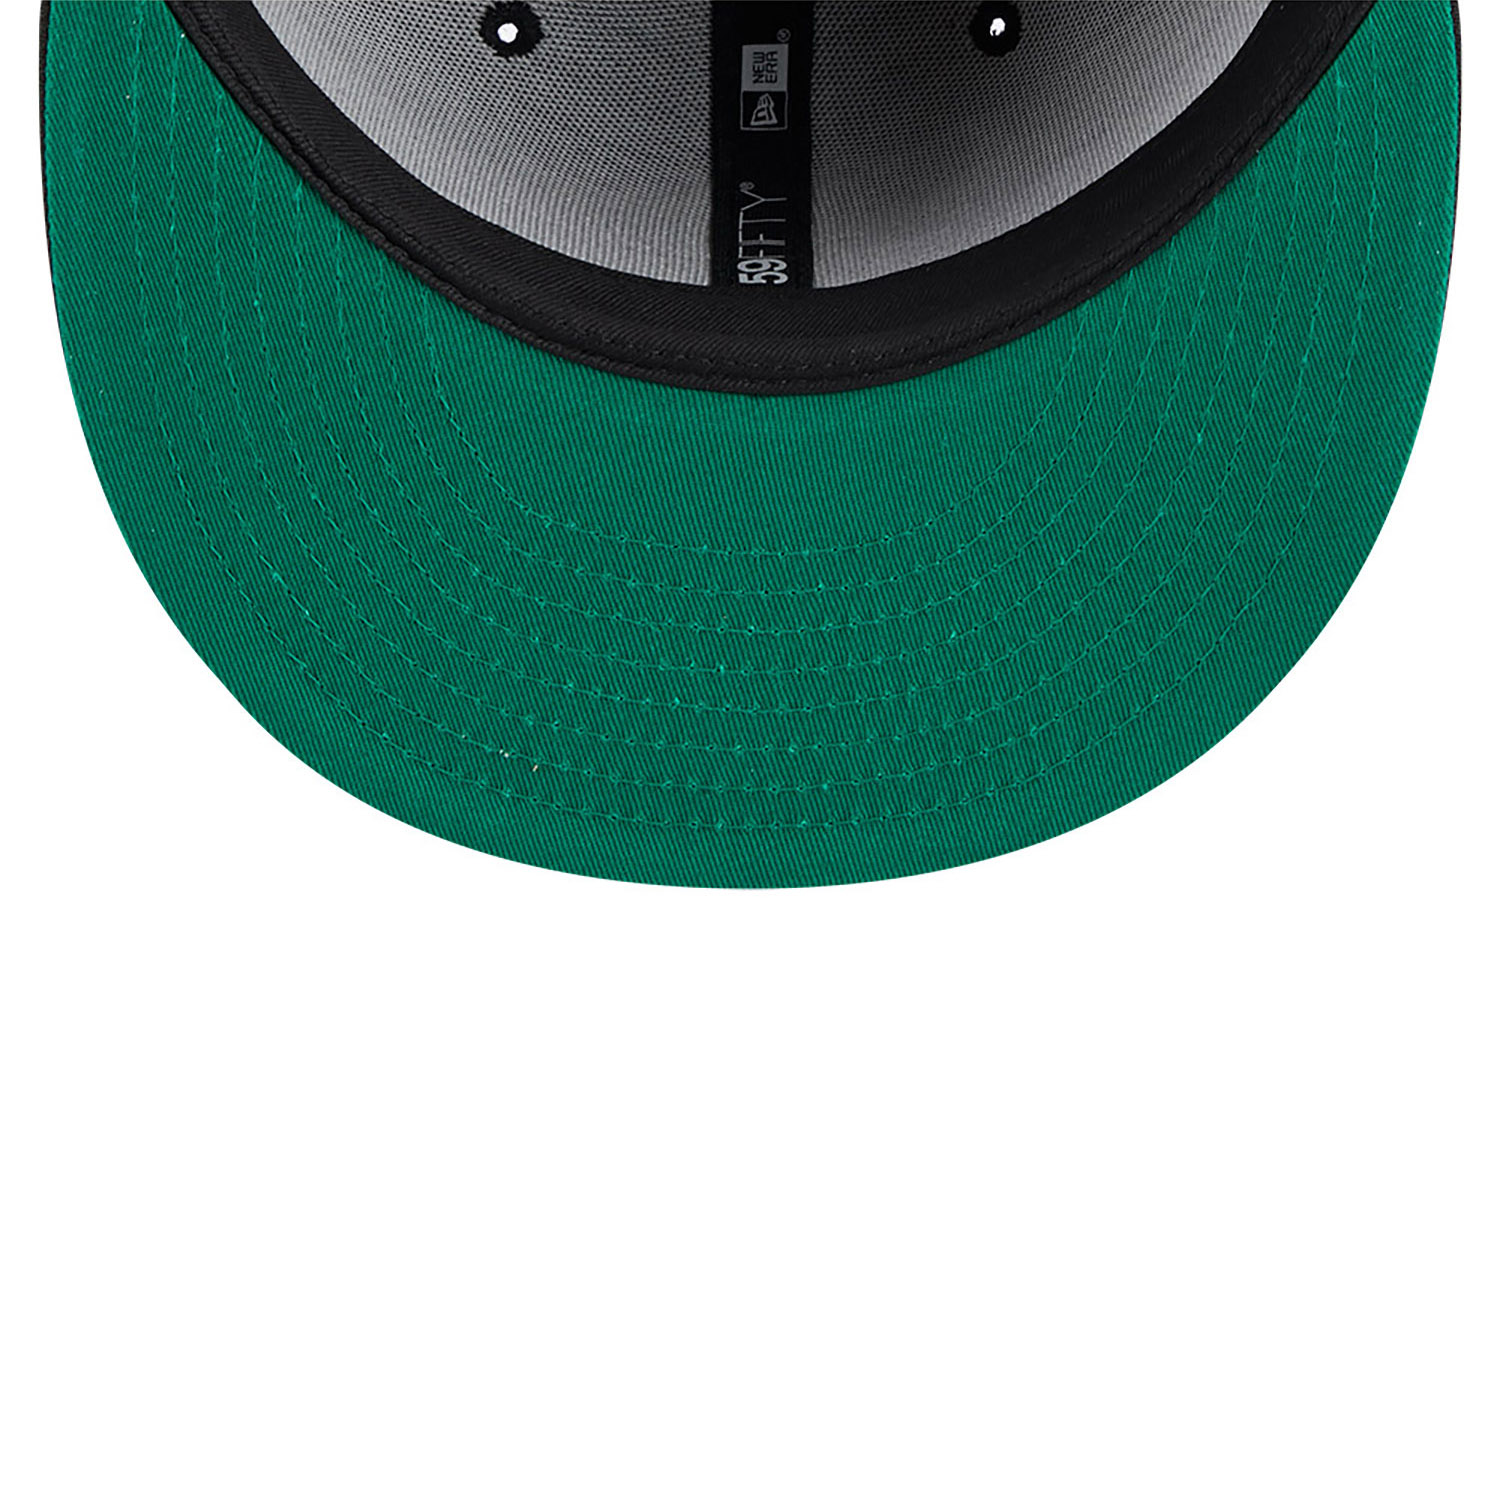 Seattle Mariners Metallic Green Pop Black 59FIFTY Fitted Cap